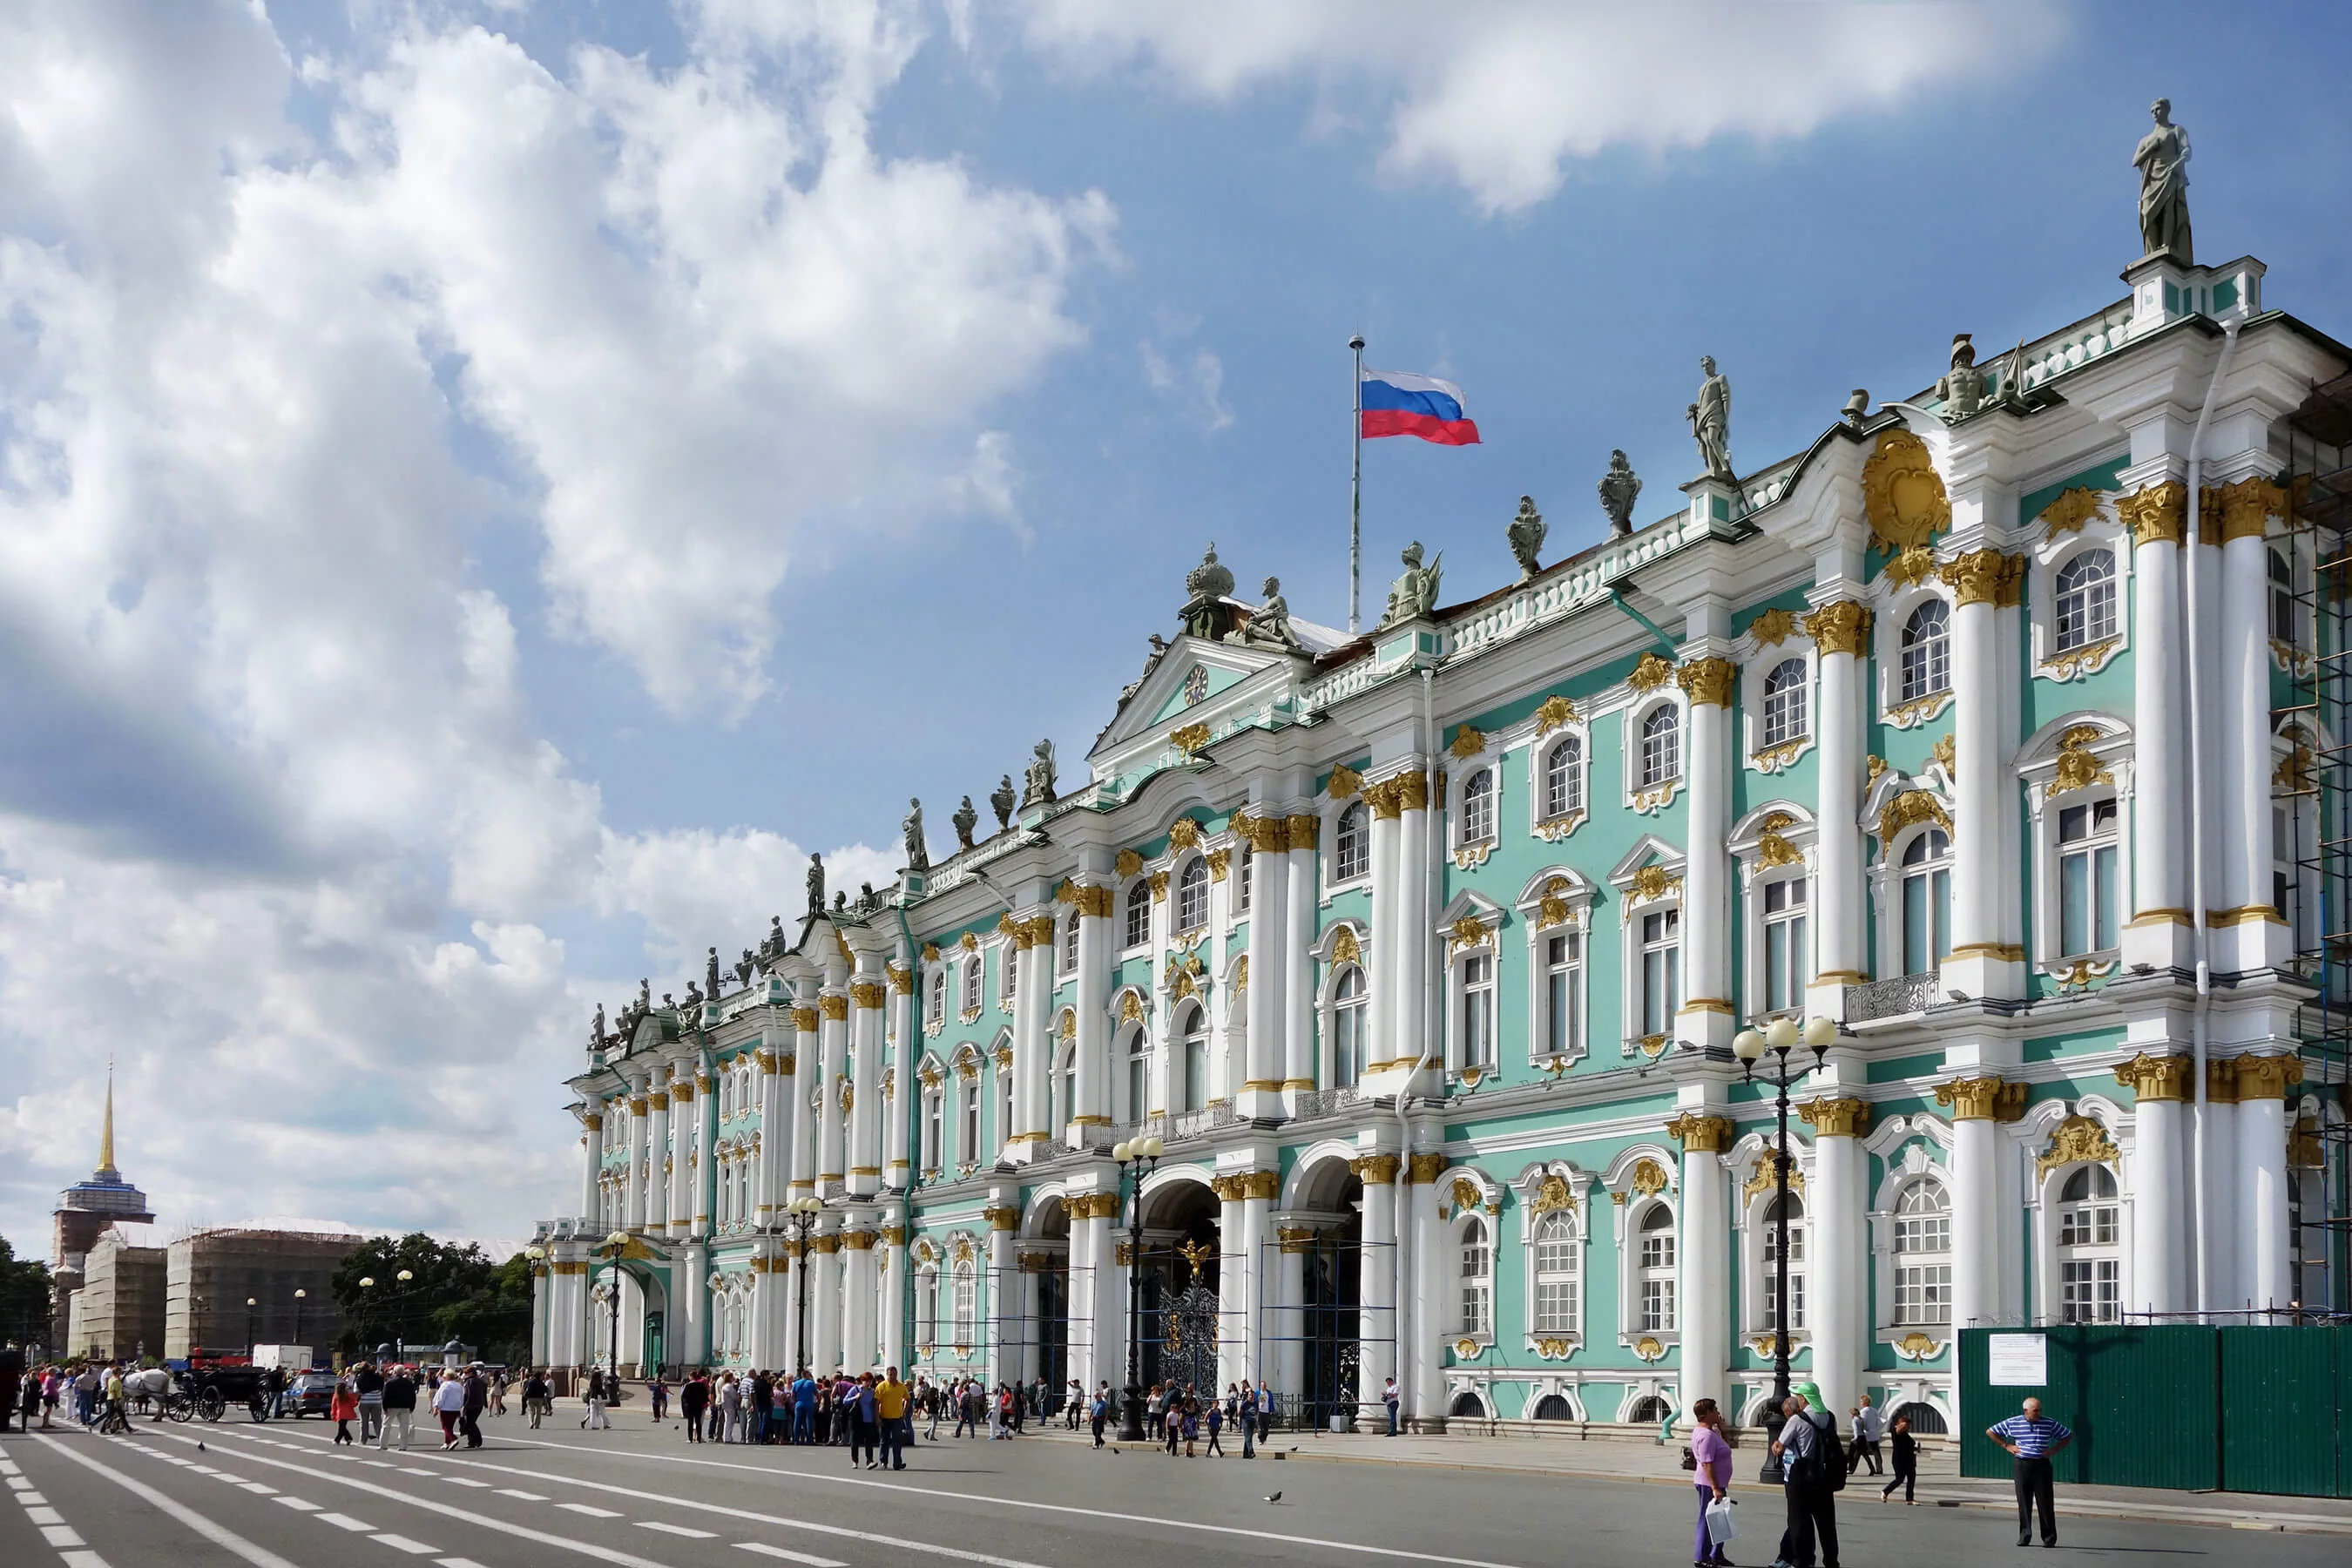 St. Petersburg's enormous Winter Palace, once the home of the czars, is now the home of the Hermitage Museum